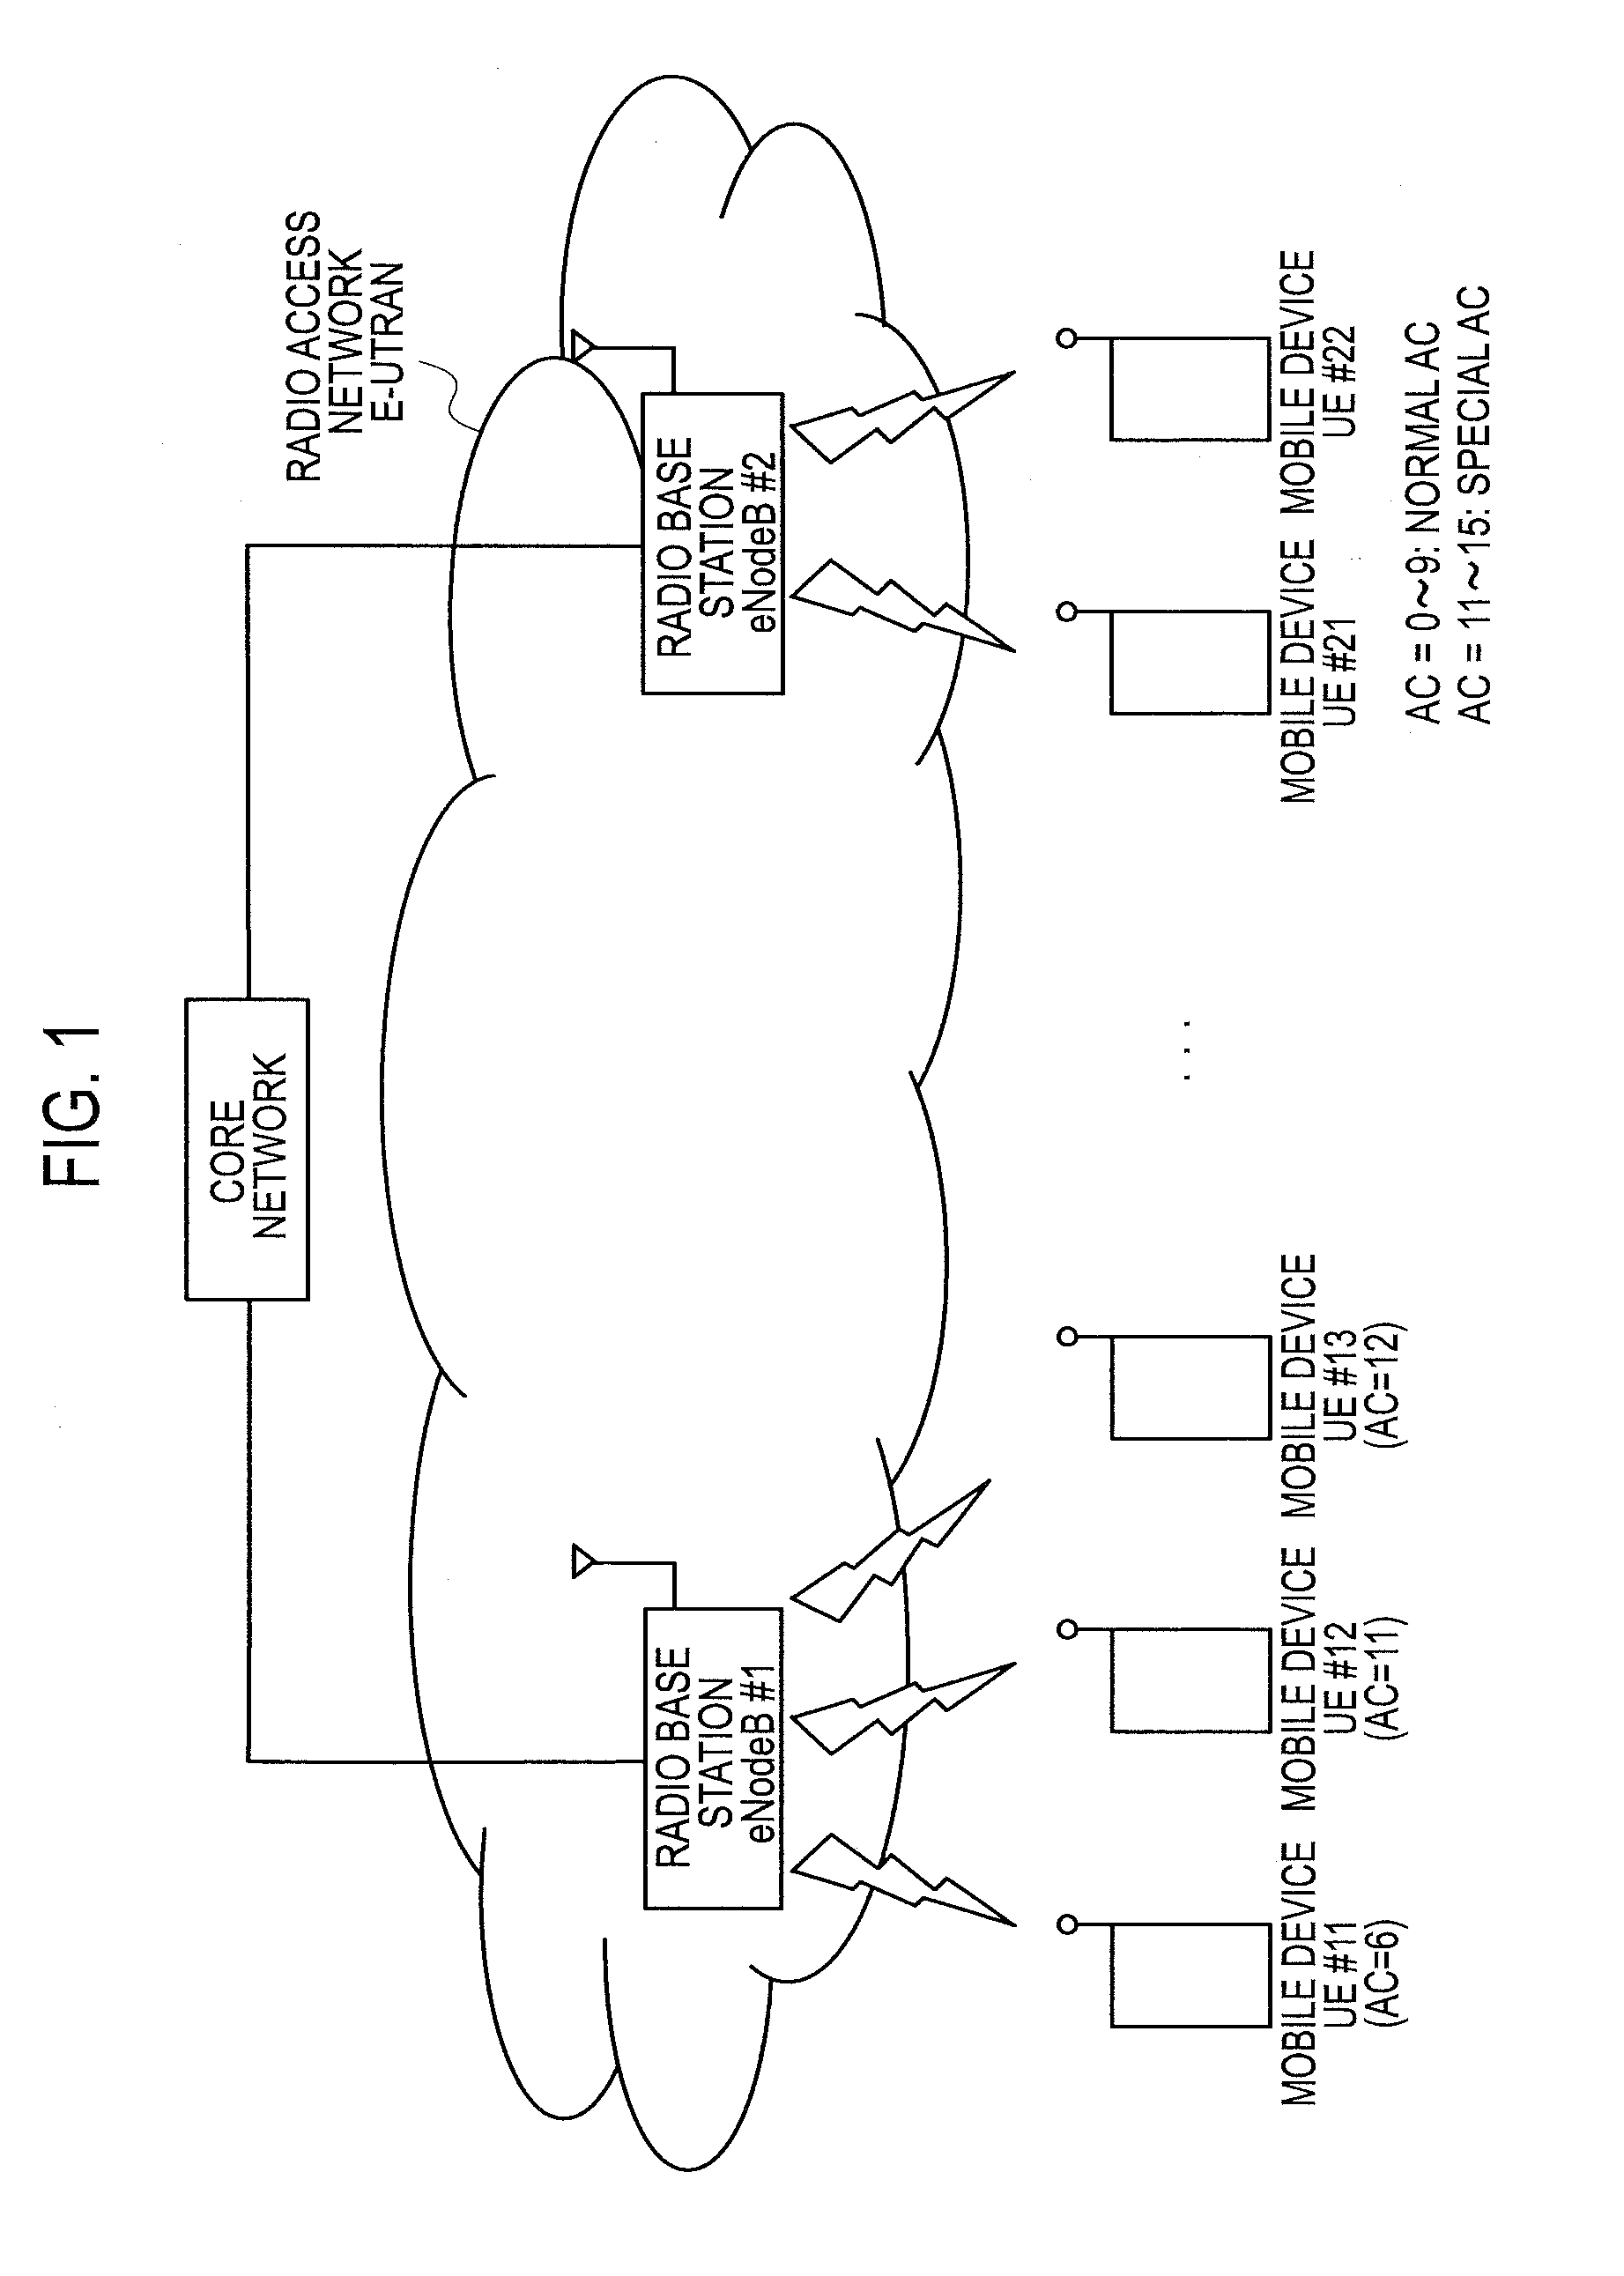 Method of barring network access, mobile device and processor